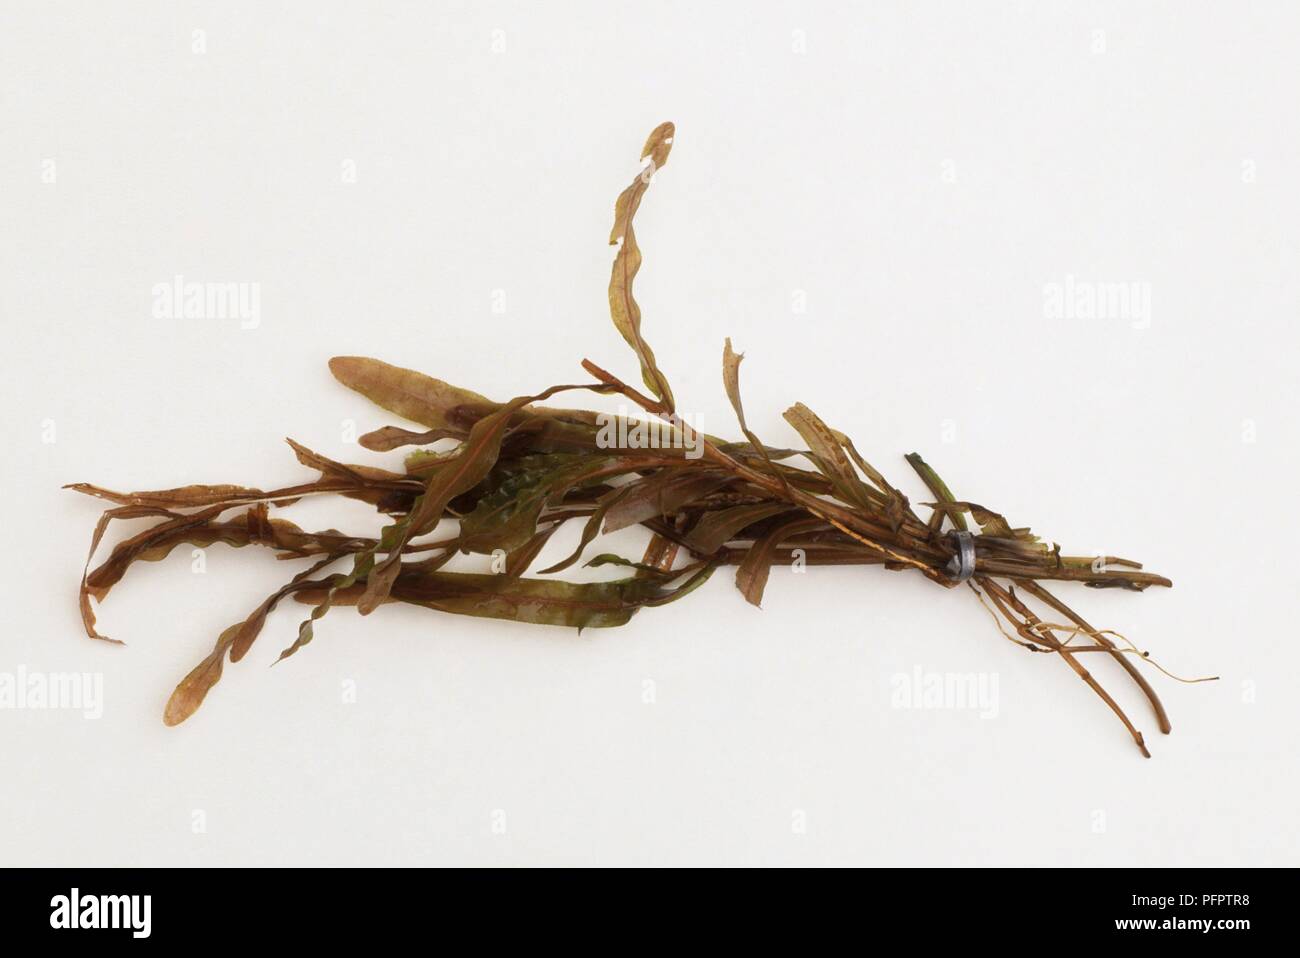 Poor example of Potamogeton crispus (Curly-leaf pondweed) showing limp, tired stems Stock Photo